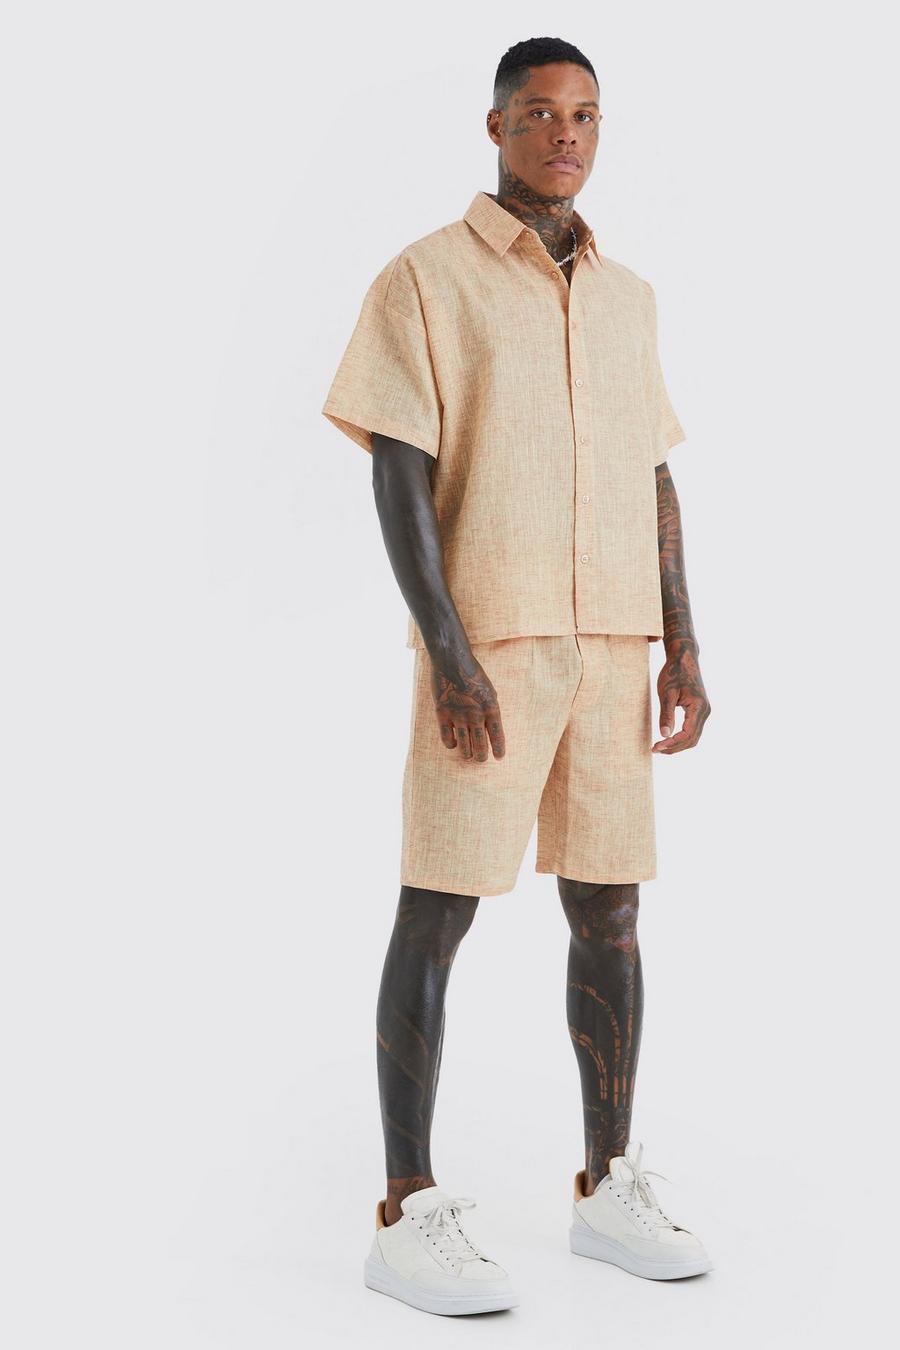 Chocolate brown Short Sleeve Boxy Linen Look Shirt And Short